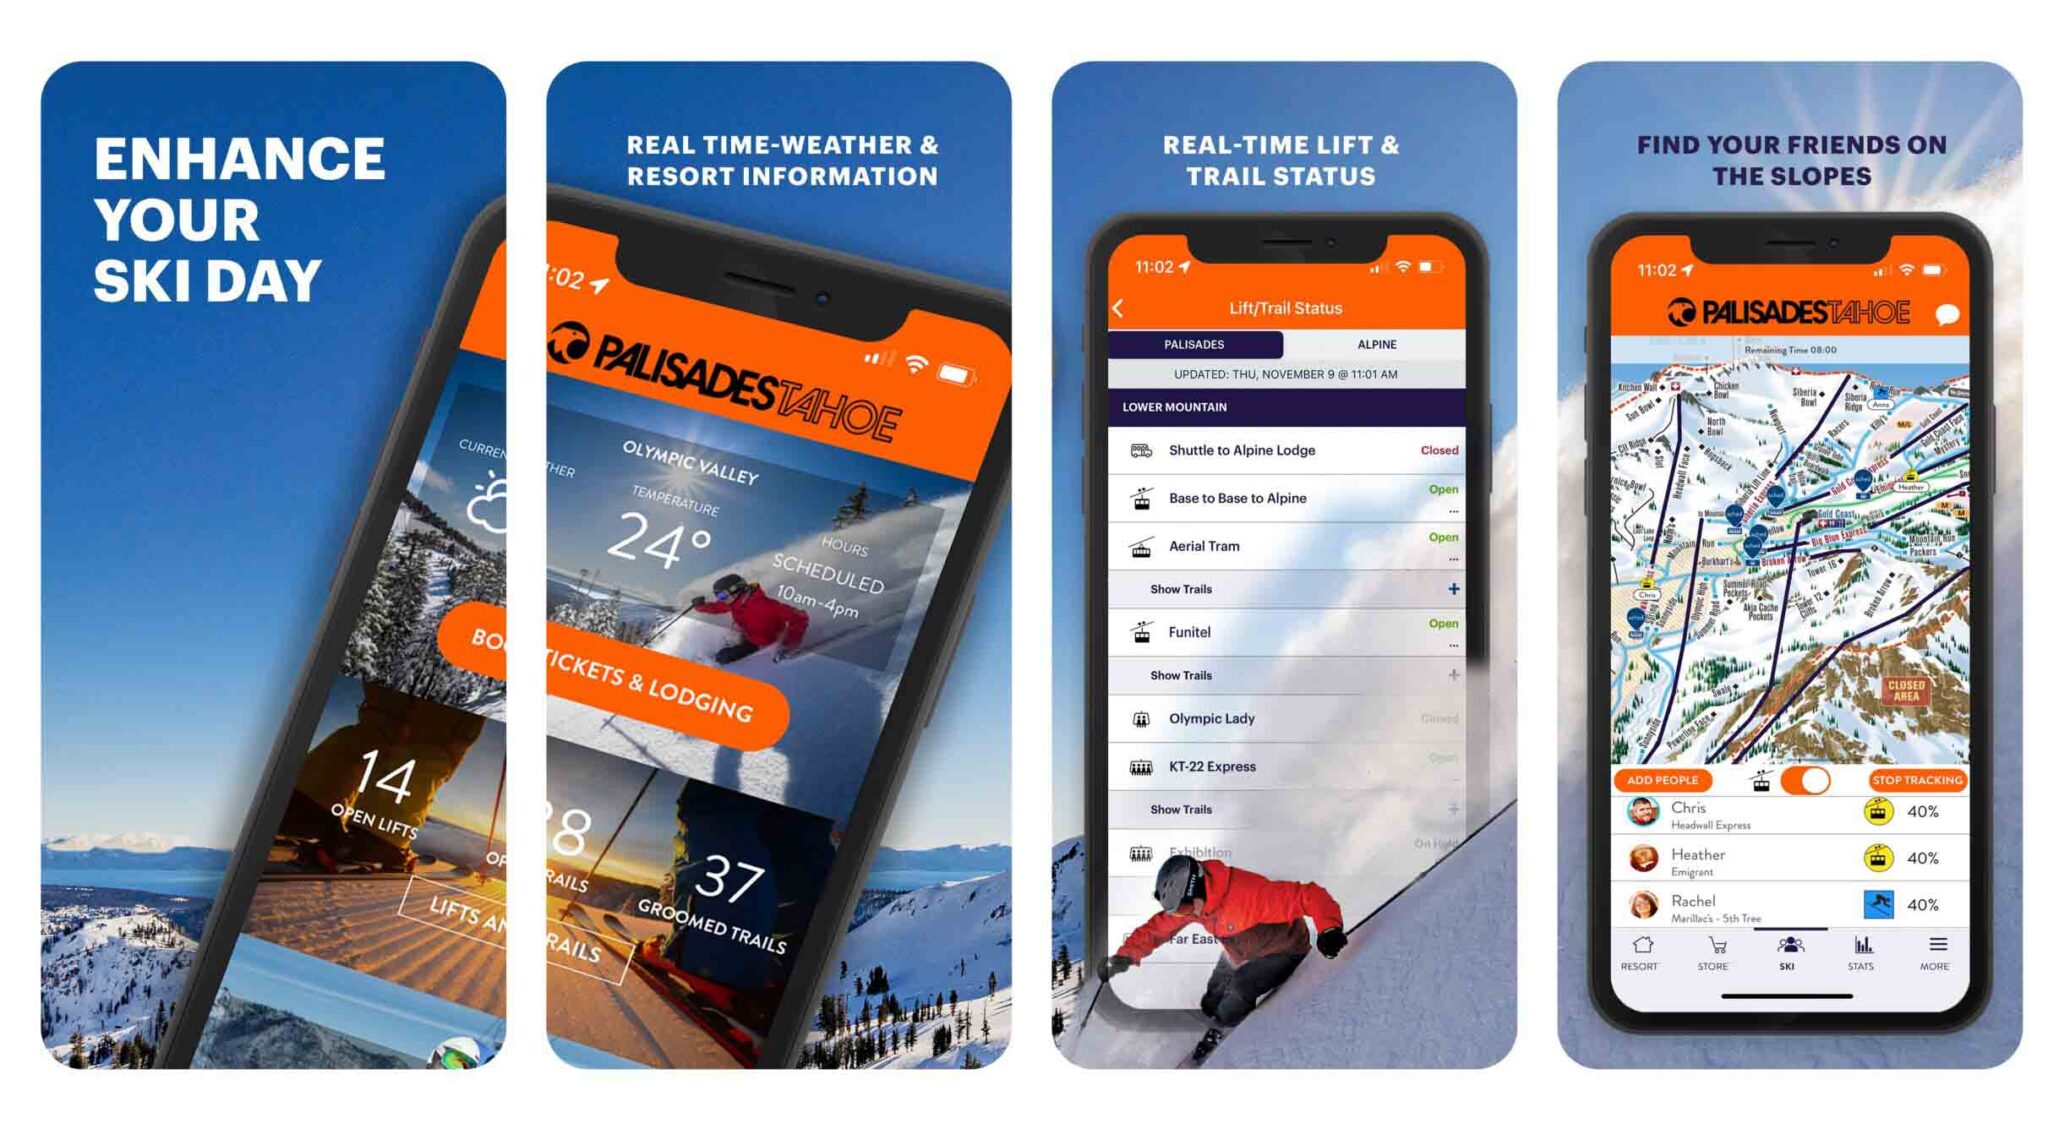 Key features of the Palisades Tahoe mobile app.